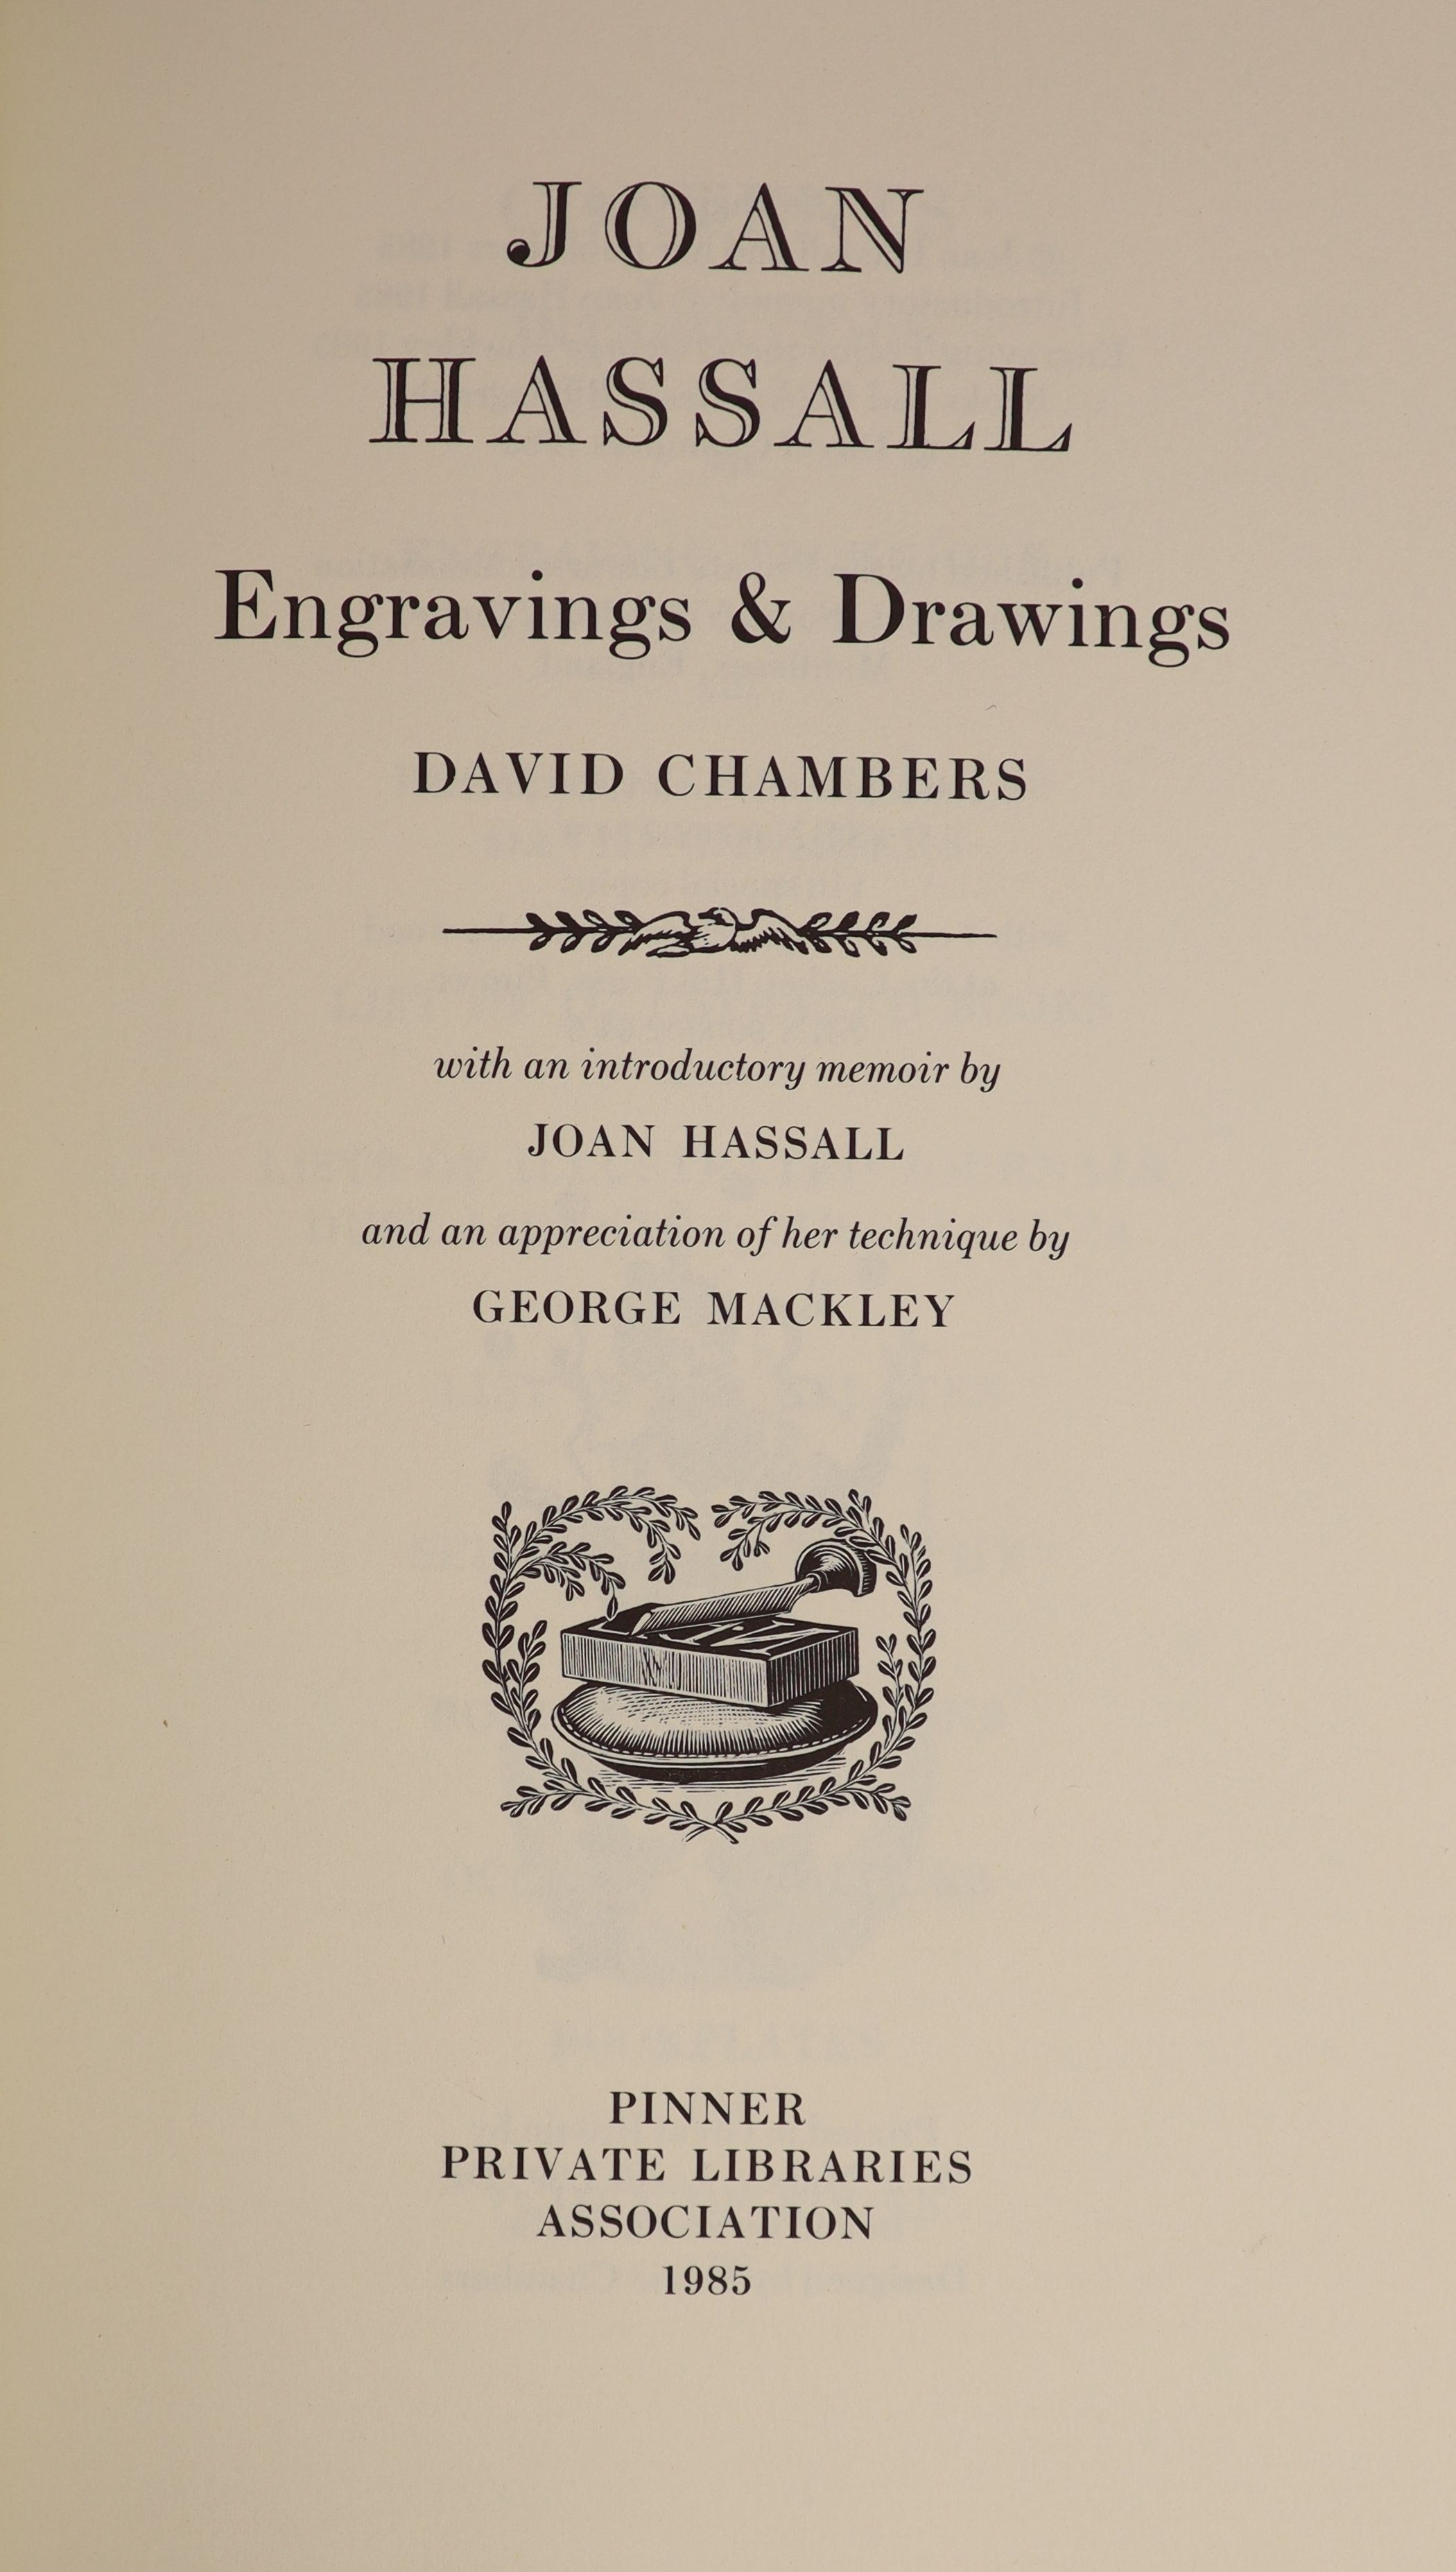 Chambers, David - Joan Hassan: Engravings and Drawings, one of 110 with 7 additional engravings and chapbook in pocket at end signed by Hassall, original half morocco, in slip case, Pinner, 1985